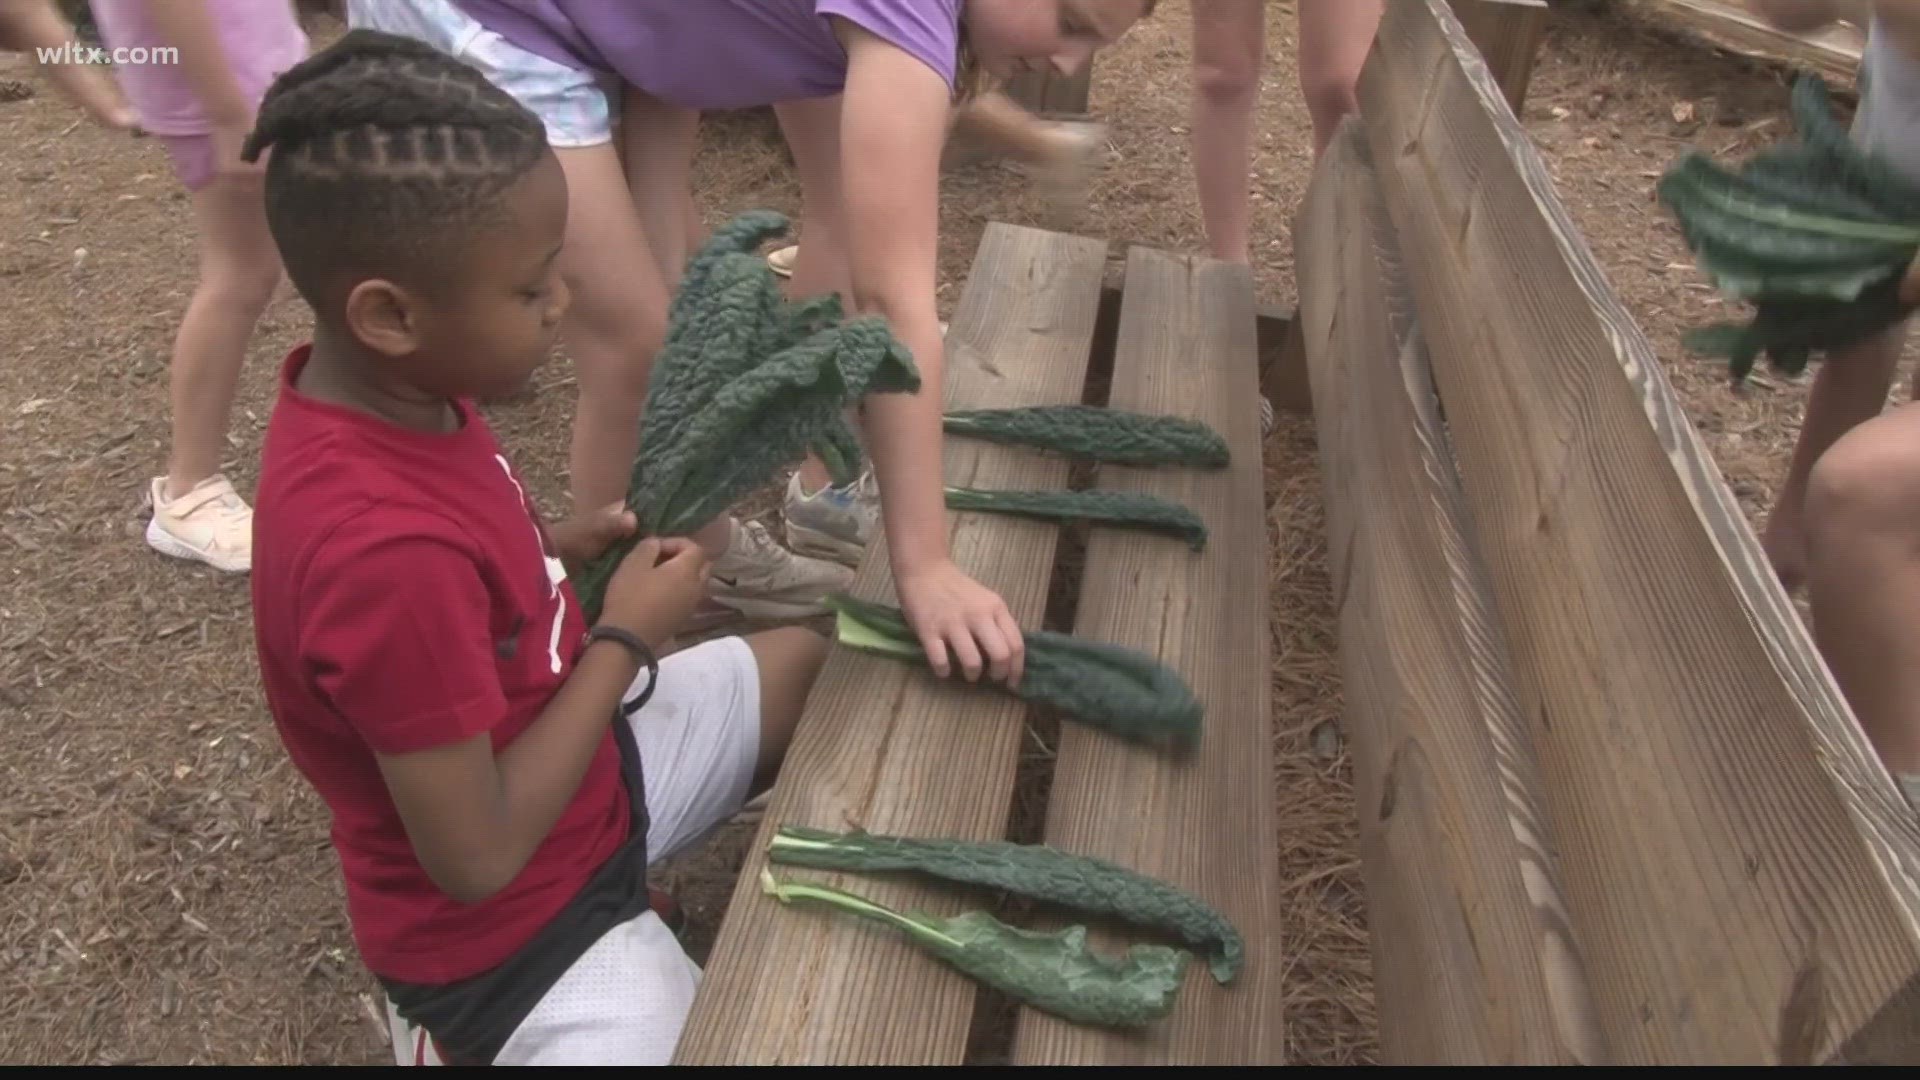 Students and teachers got to reap the hard work of gardening as they got to take home some of their harvest.